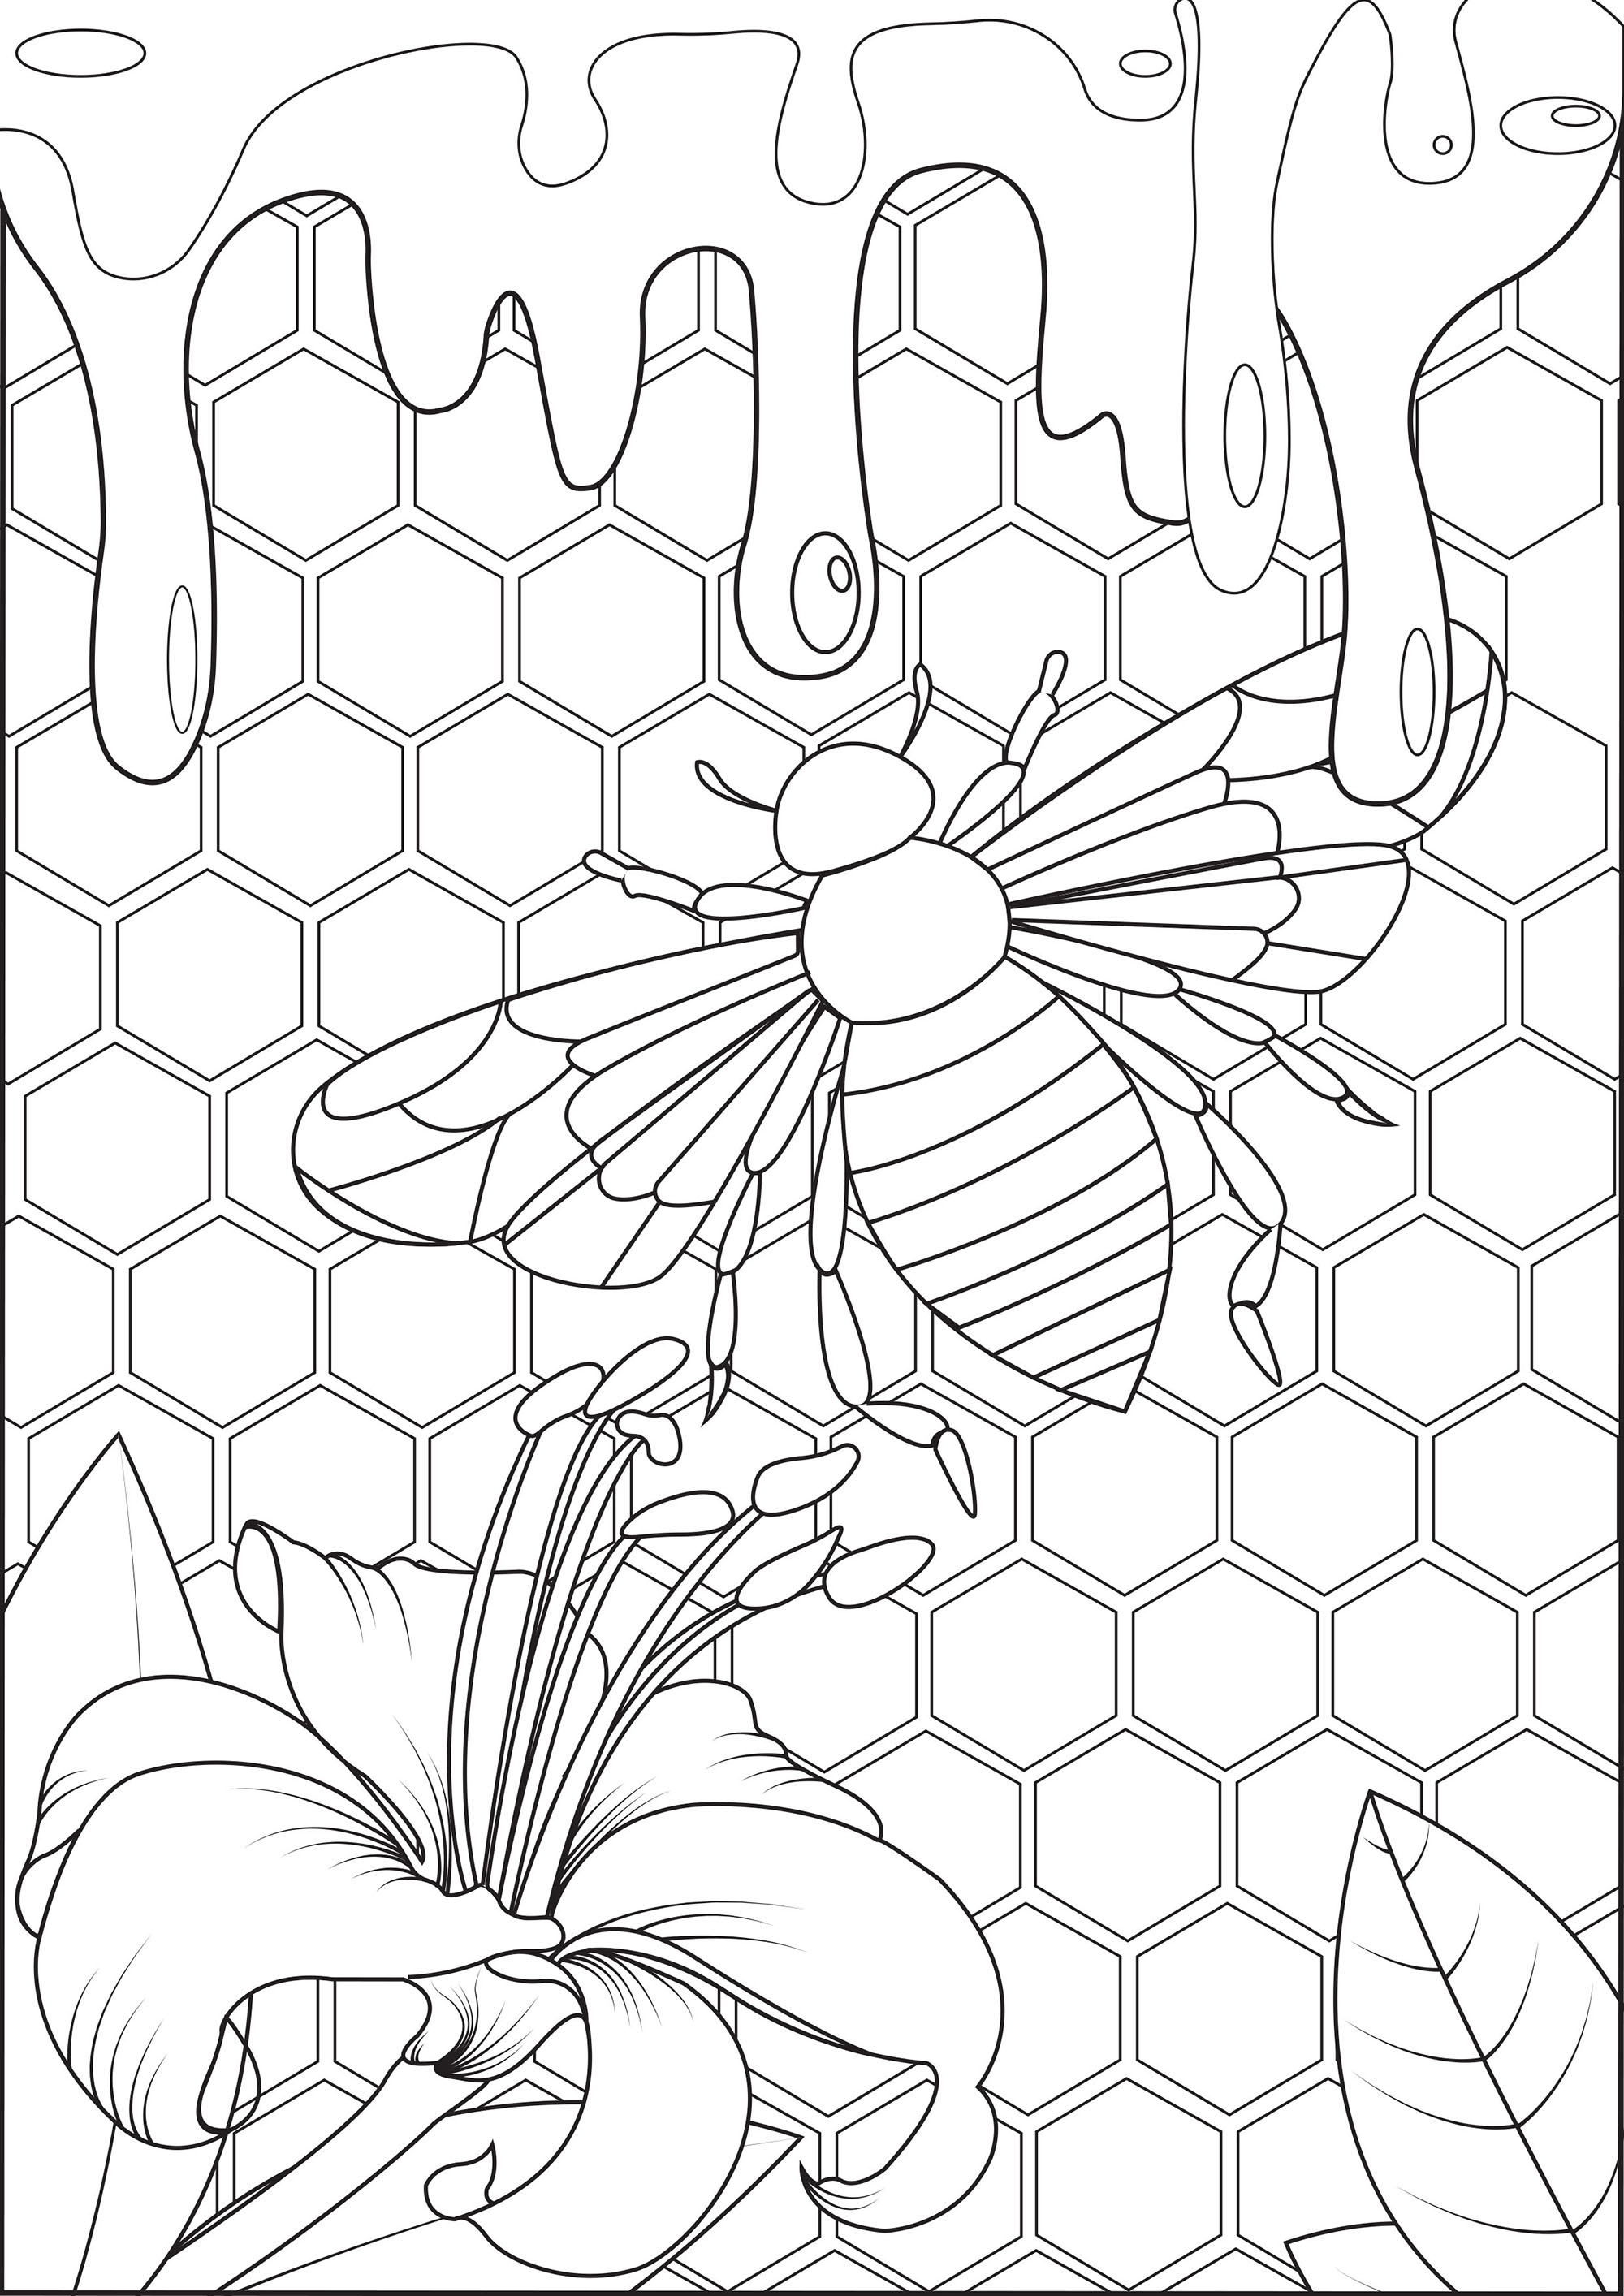 Dive into the heart of the hive and taste this fresh honey!. This coloring is an invitation to dive into the world of bees and discover their world ...